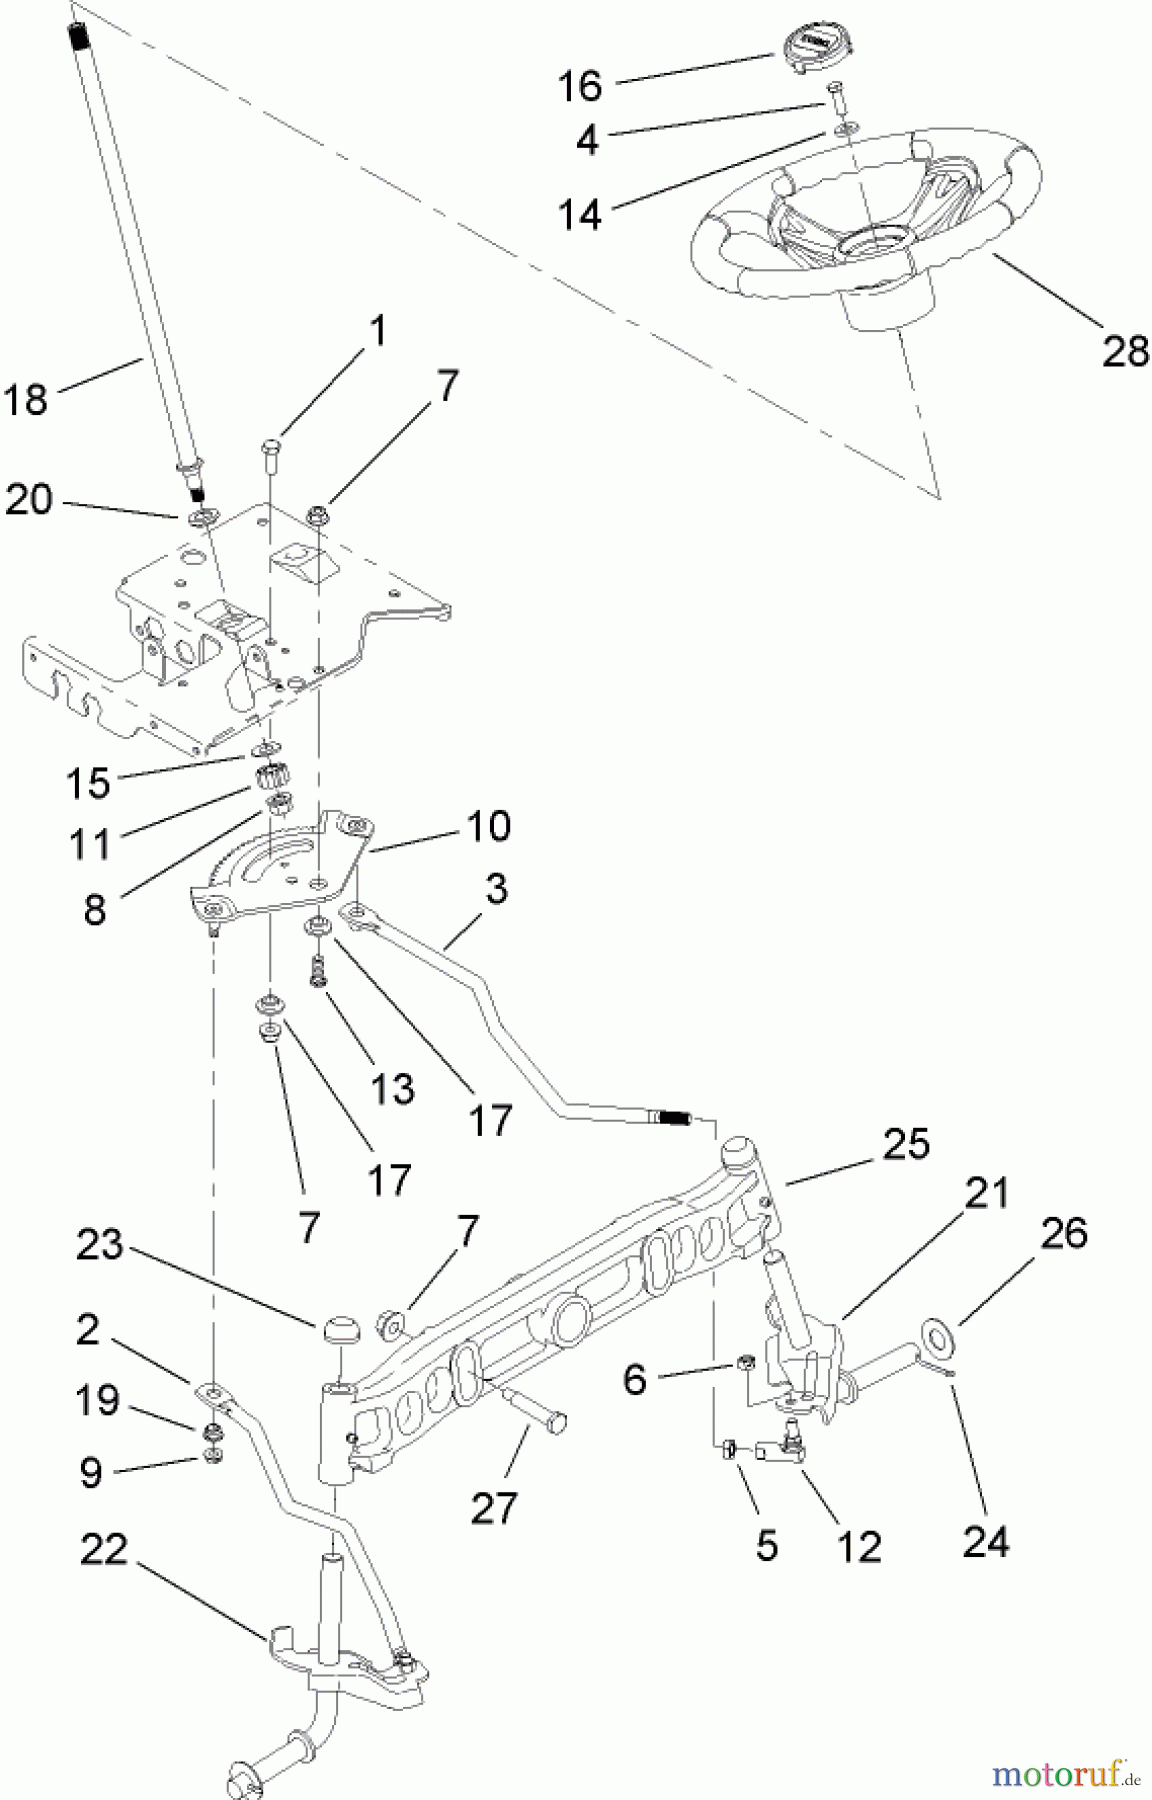  Toro Neu Mowers, Lawn & Garden Tractor Seite 1 13AP60RP544 (LX500) - Toro LX500 Lawn Tractor, 2006 (1A056B50000-) STEERING SHAFT AND FRONT AXLE ASSEMBLY